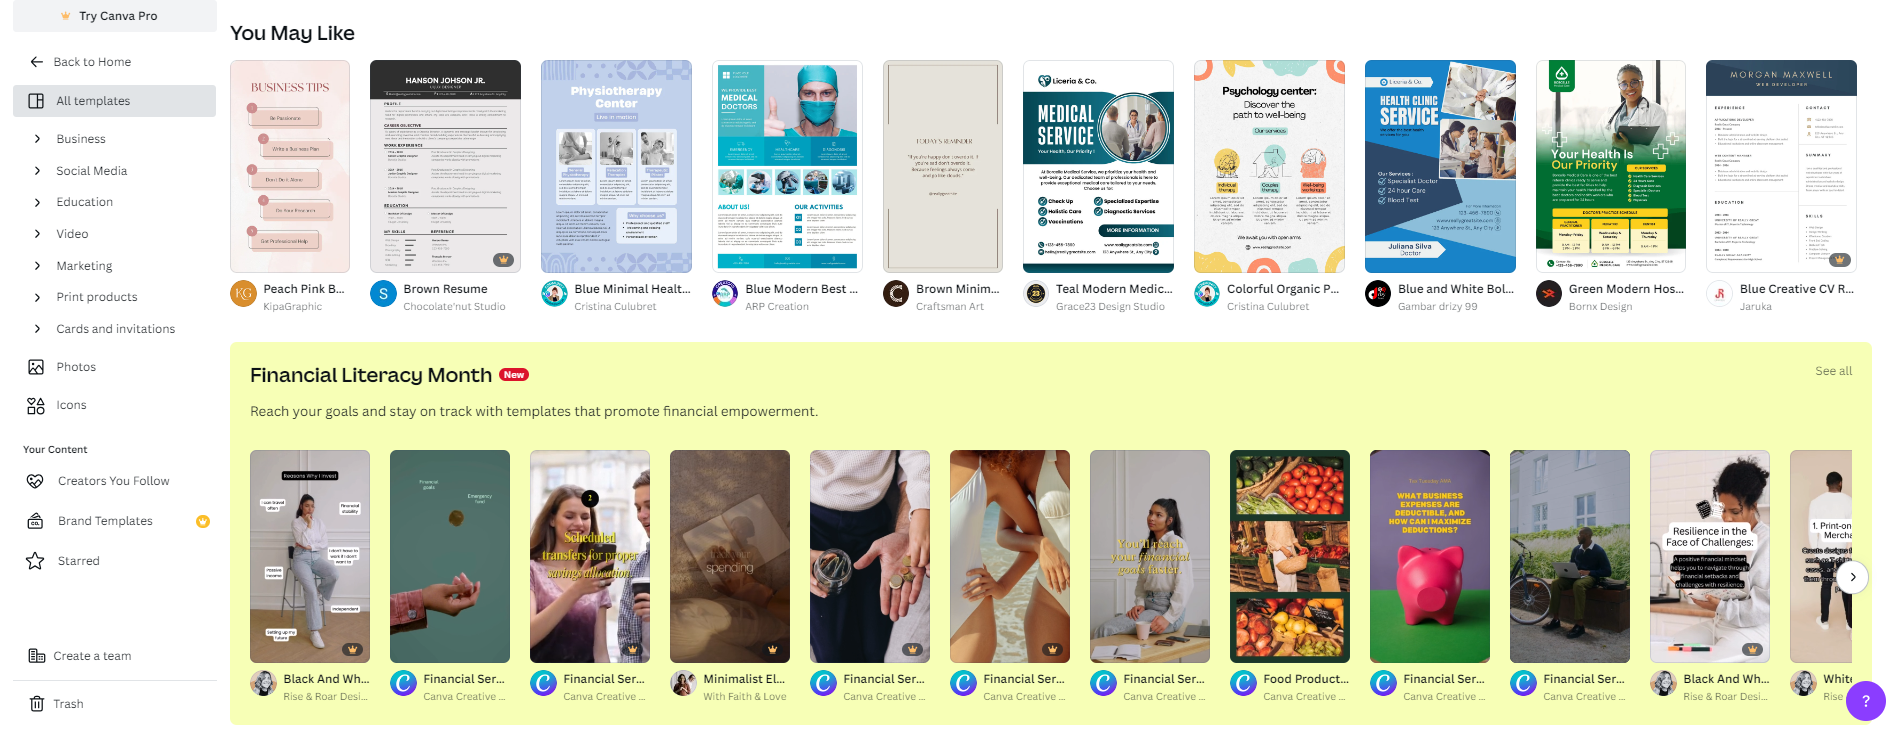 Some of the templates availabe in Canva